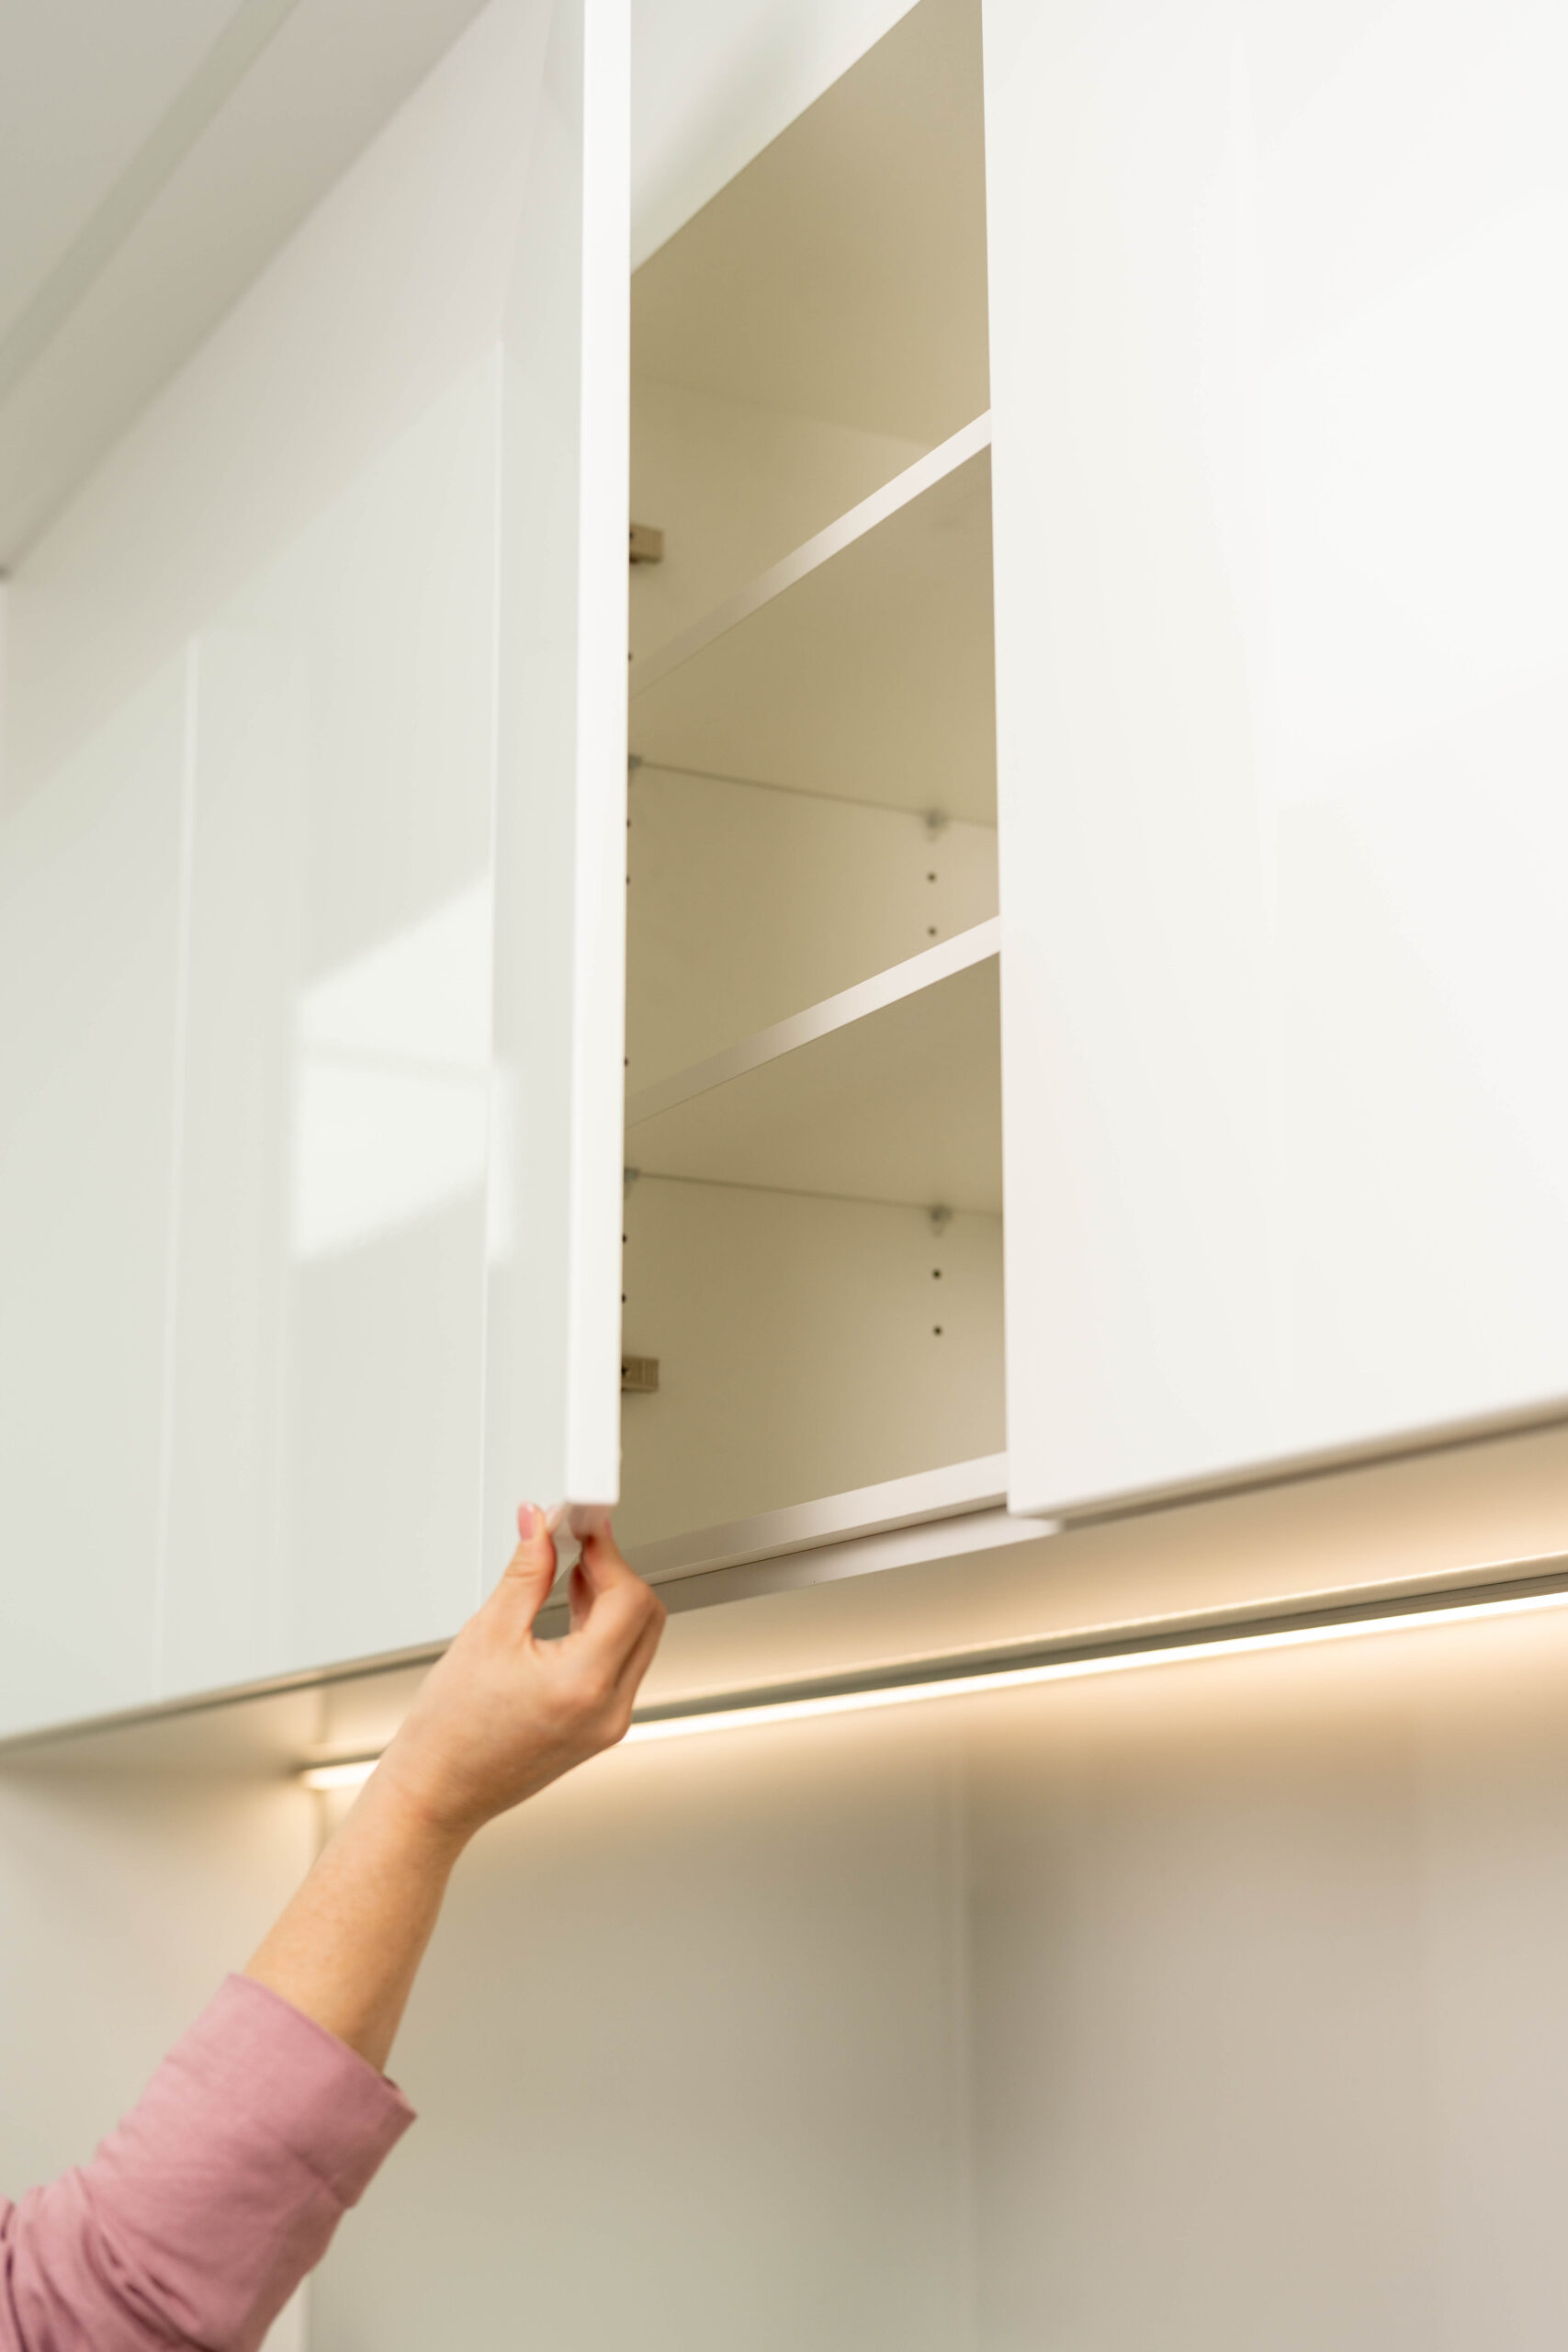 White overhead cabinetry with a handleless option for a minimalist look.